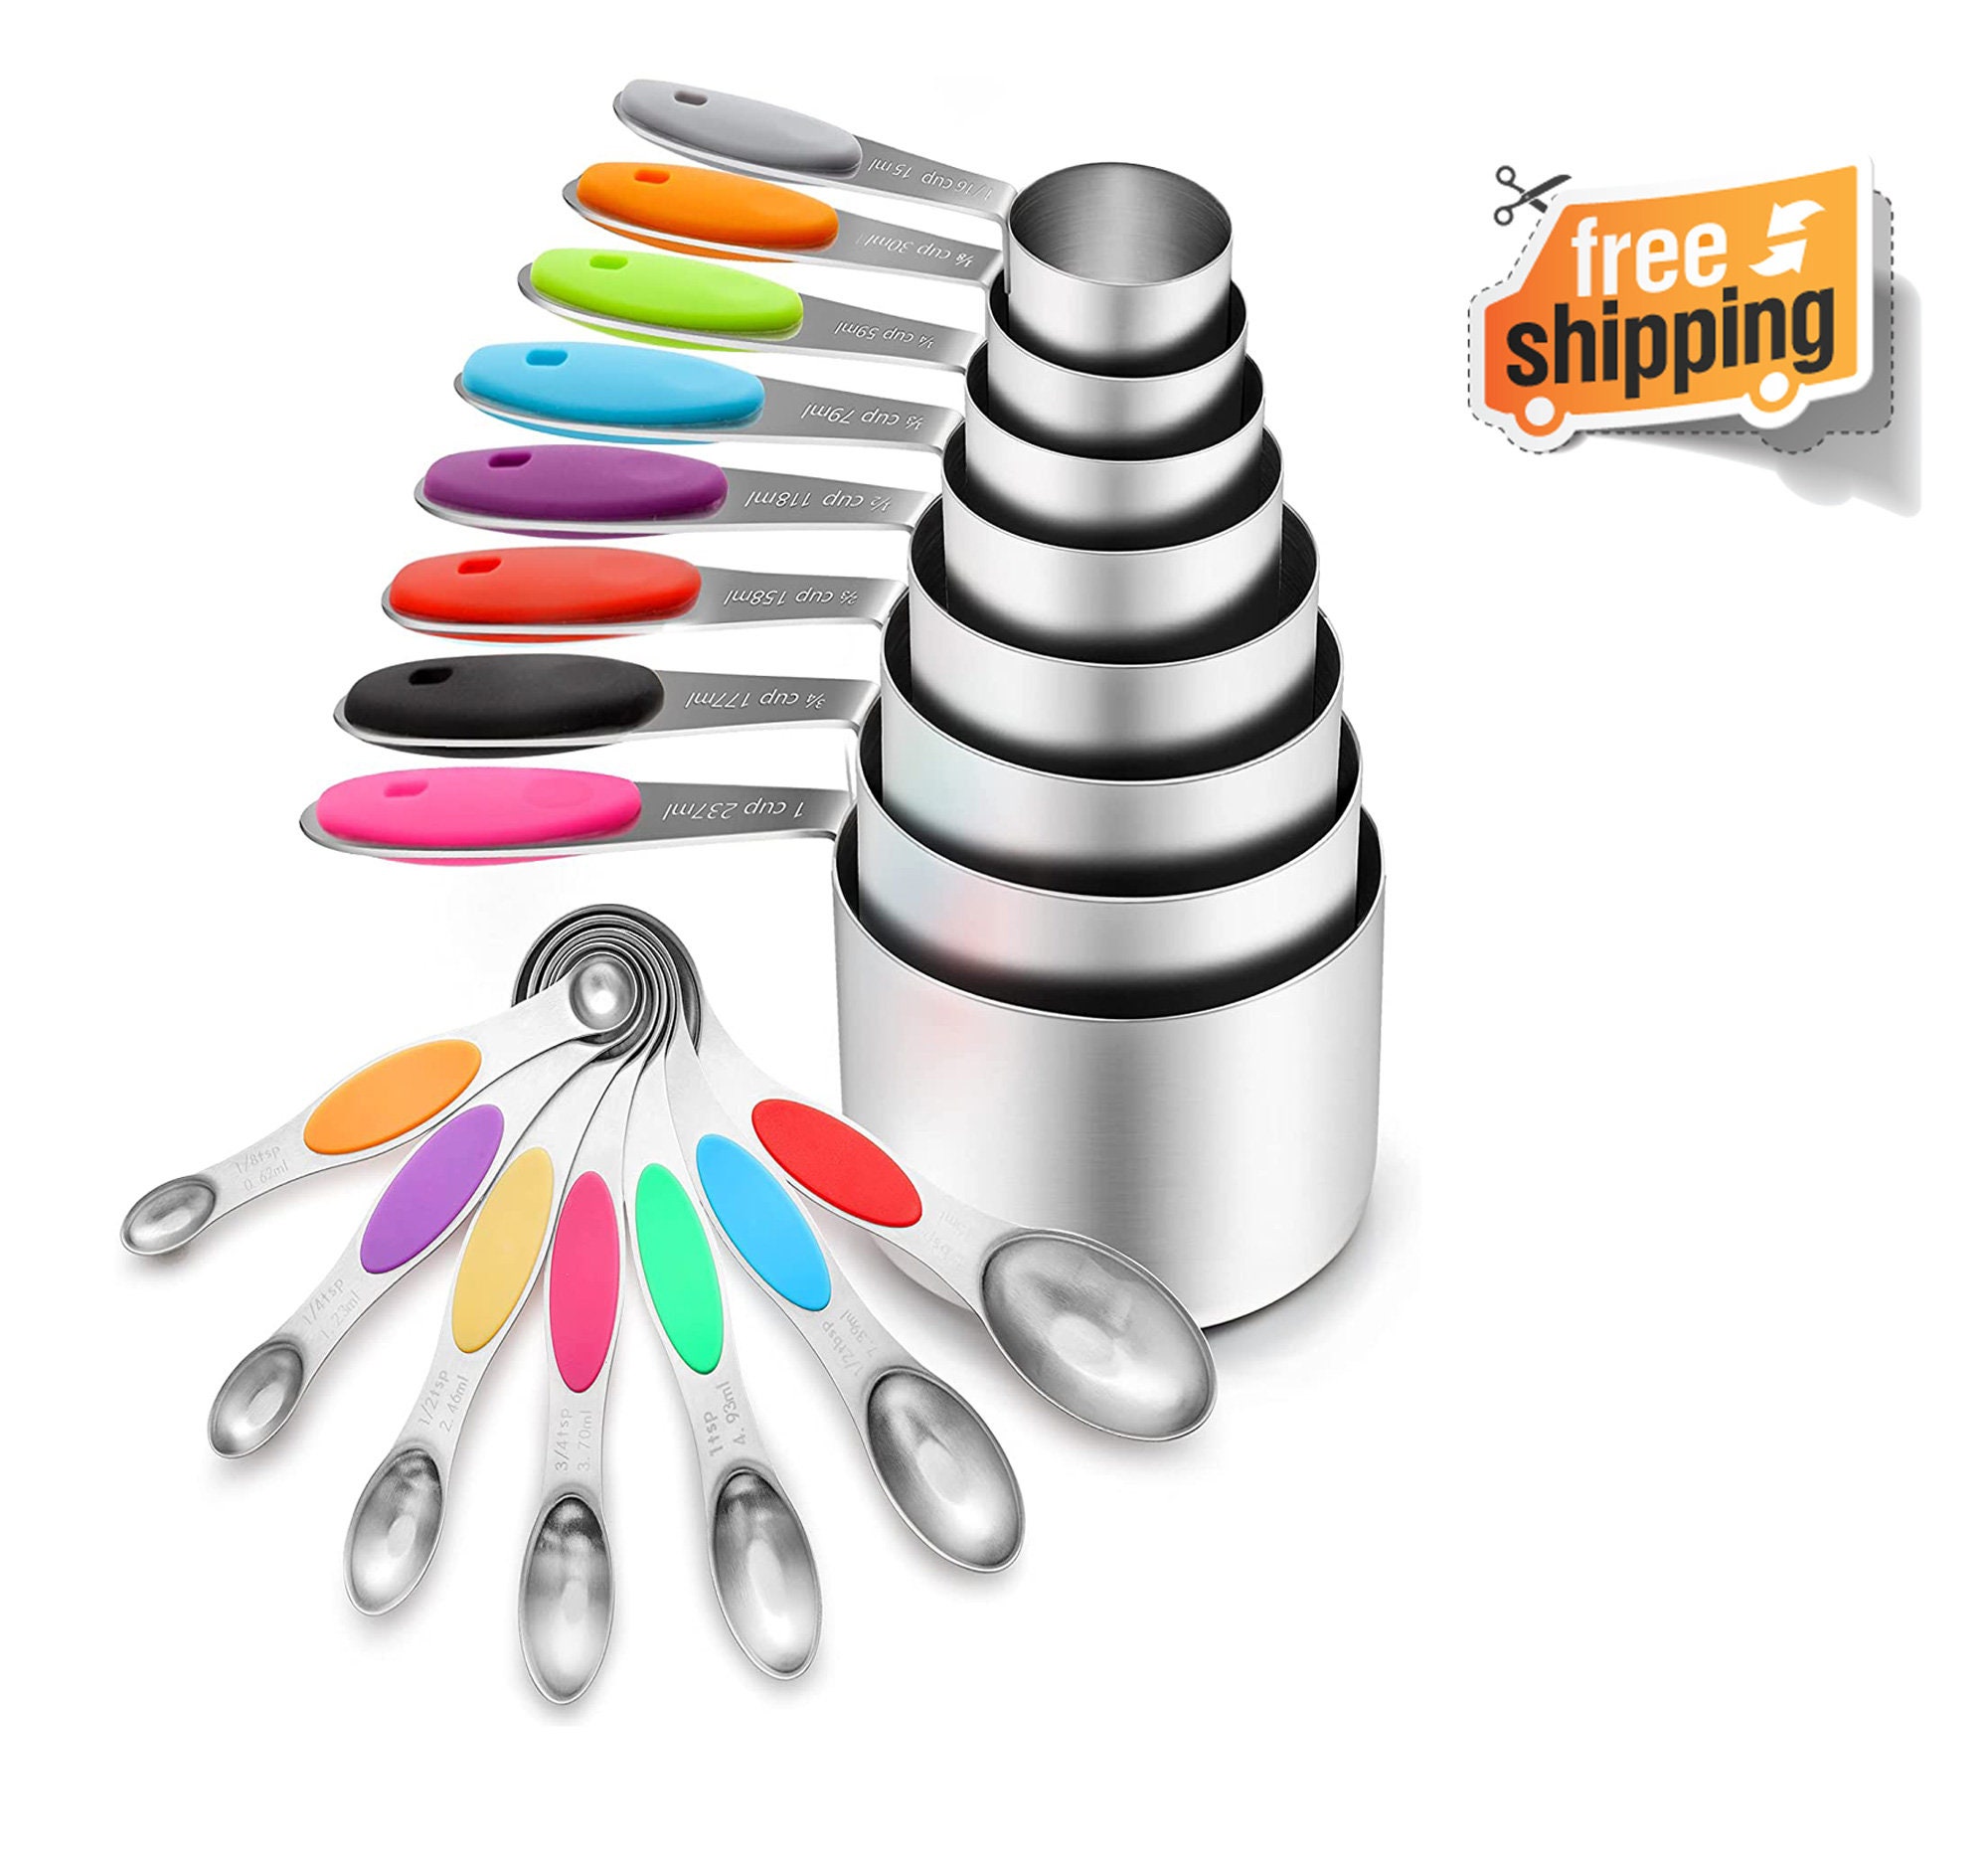 Measuring Cups and Spoons Set Stainless Steel Includes 8 Heavy Duty  Measuring Cups 8 Double Sided Magnetic Measuring Spoons and 1 Leveler for  Dry and